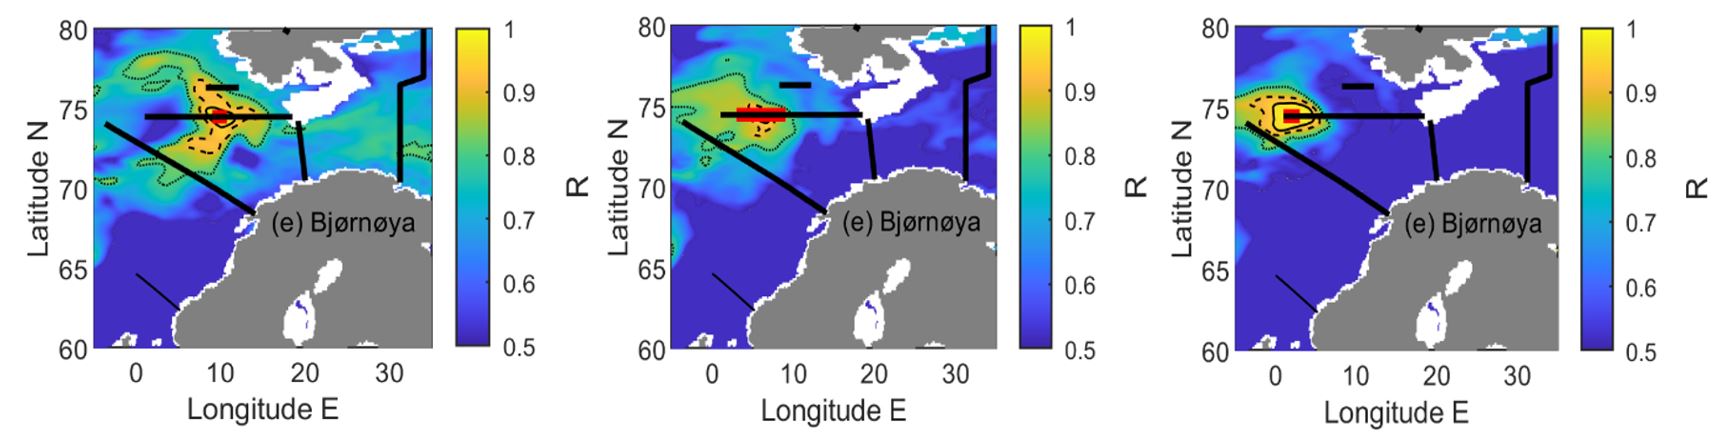 Figure 24: Maps of correlation coefficients between annual mean temperature at 100 m depth at different locations along the Bjørnøya-West transect (as indicated in red) and all surrounding model grid points. Dashed lines indicated the 0.95, 0.9 and 0.85 correlation (R) contours. Black lines indicate the locations of fixed CTD transects. Plots are generated using the TOPAZ Arctic Ocean Physics Reanalysis.